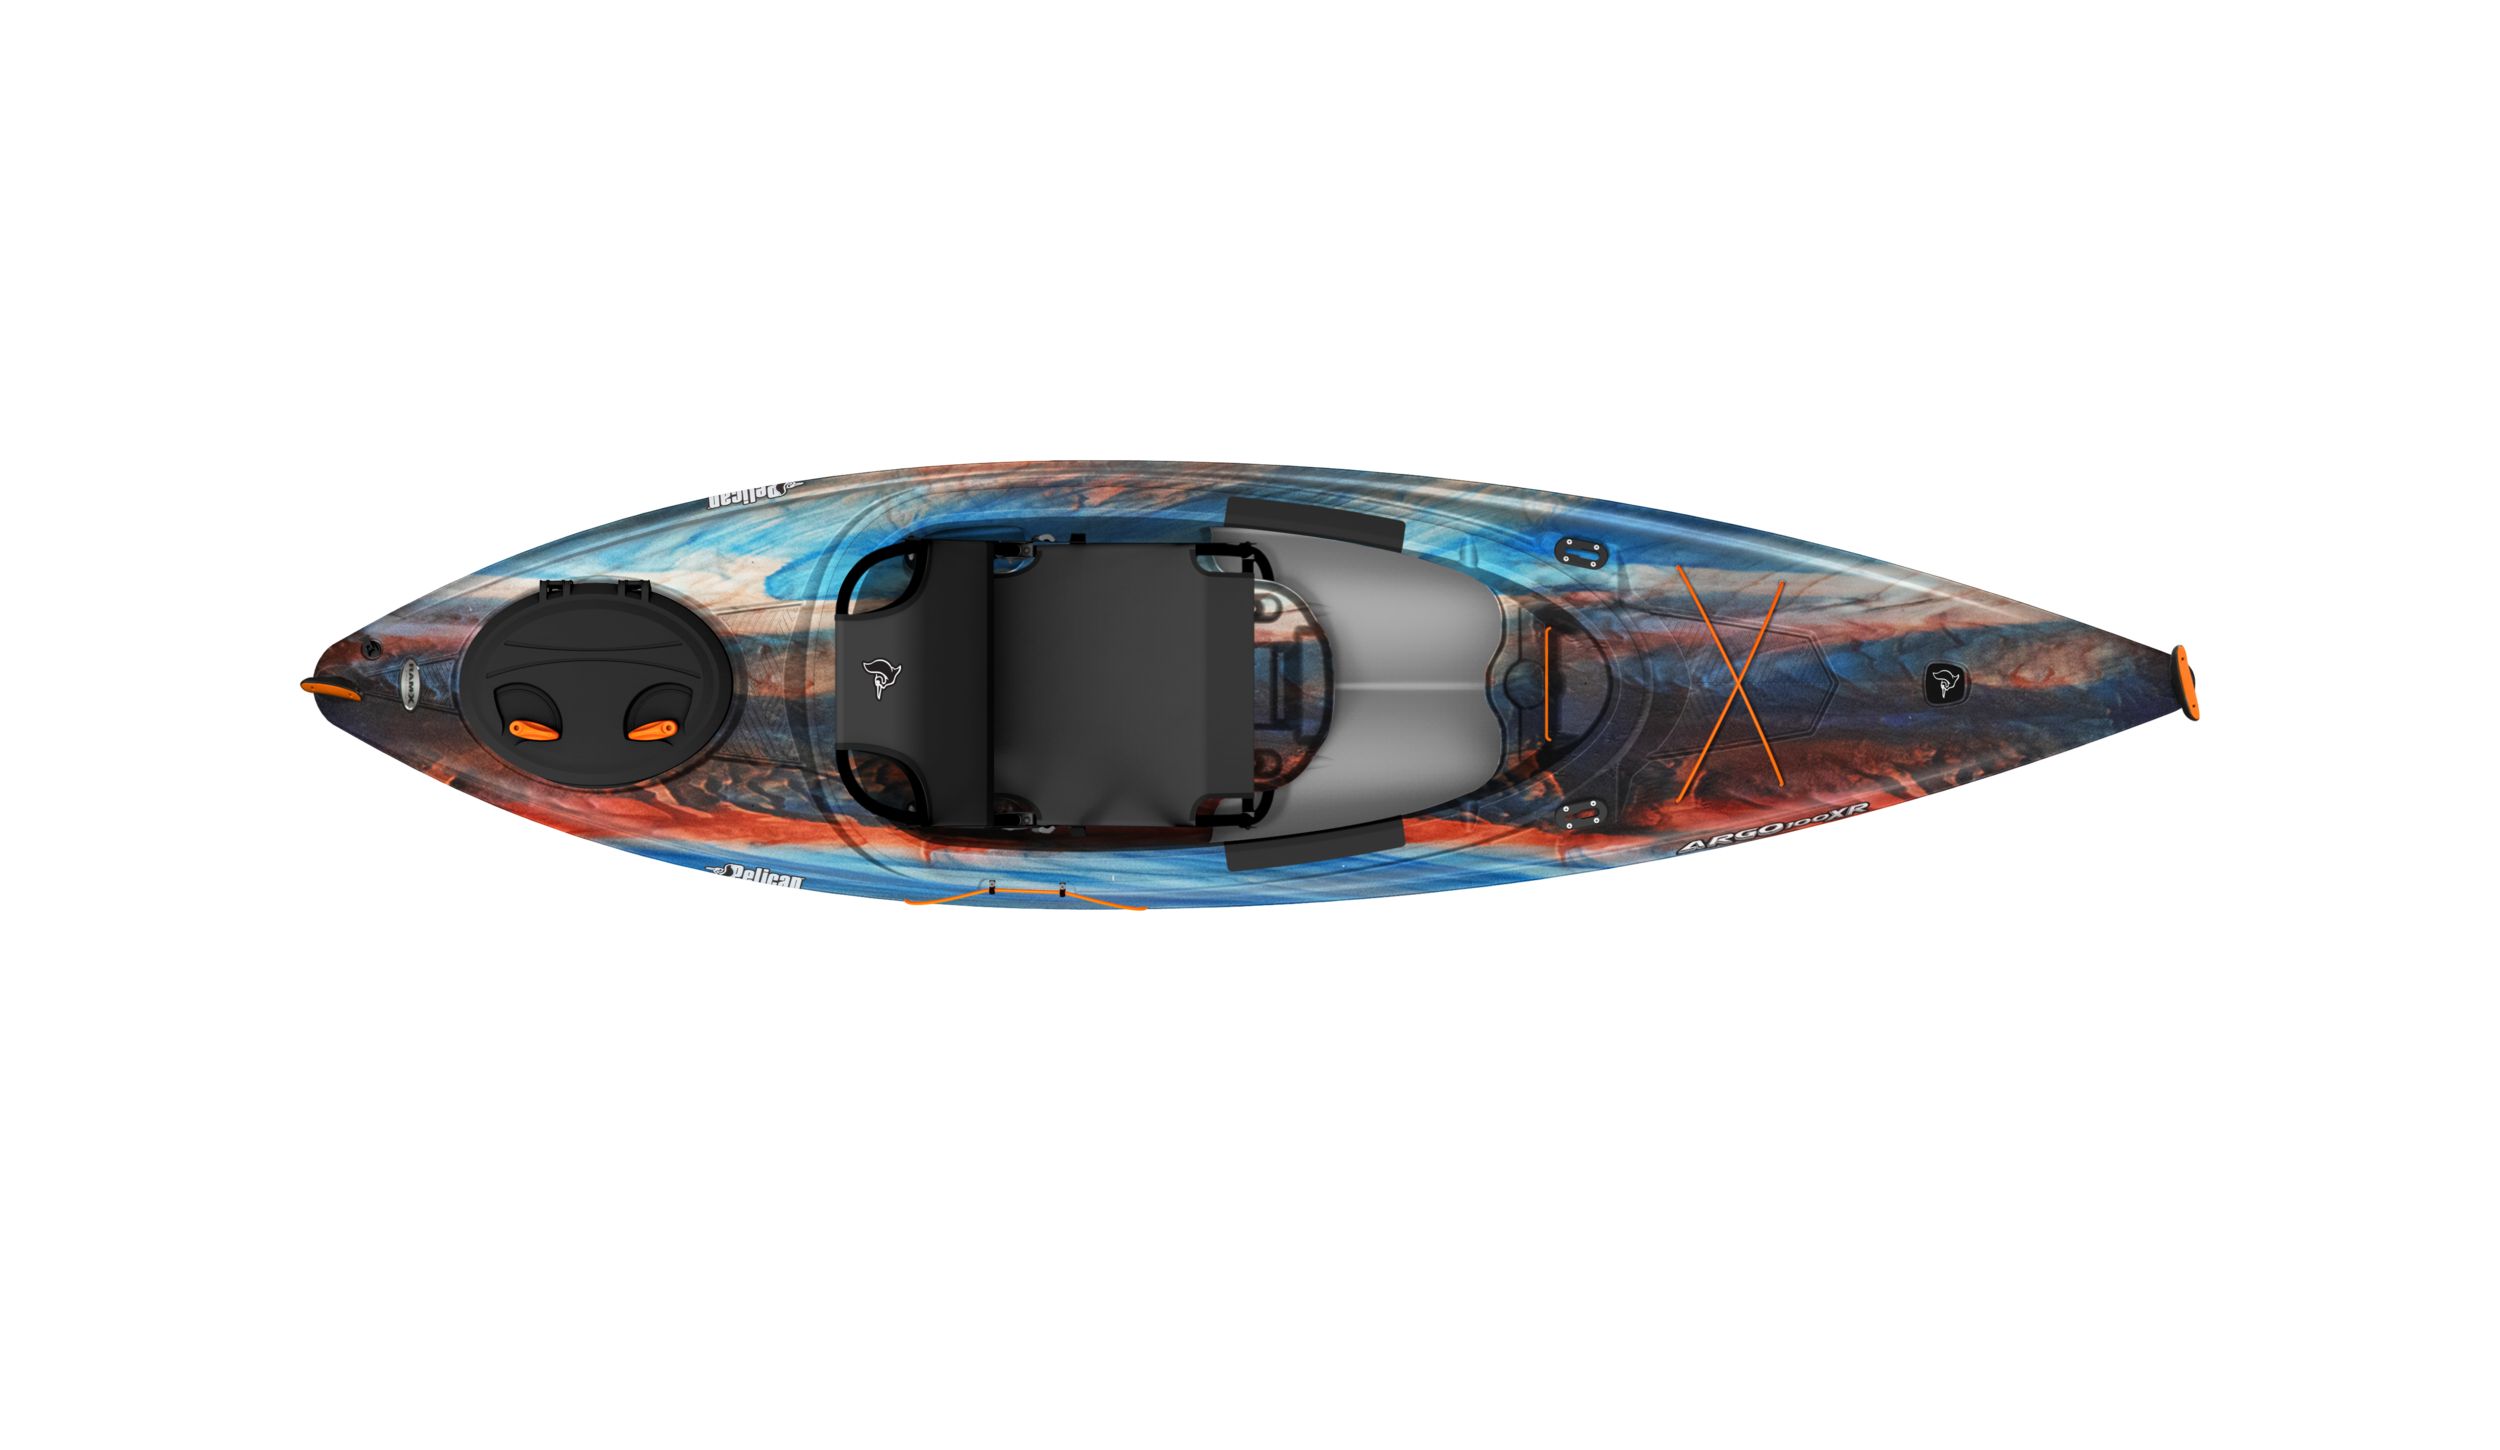 https://media-www.atmosphere.ca/product/div-01-hardgoods/dpt-14-watersports/sdpt-10-paddlesports/333224879/pelican-argo-100xr-kayak-s20-blue-patn-6--fd498d8c-05bc-4d09-8d92-96bfa558d625-jpgrendition.jpg?imdensity=1&imwidth=1244&impolicy=mZoom